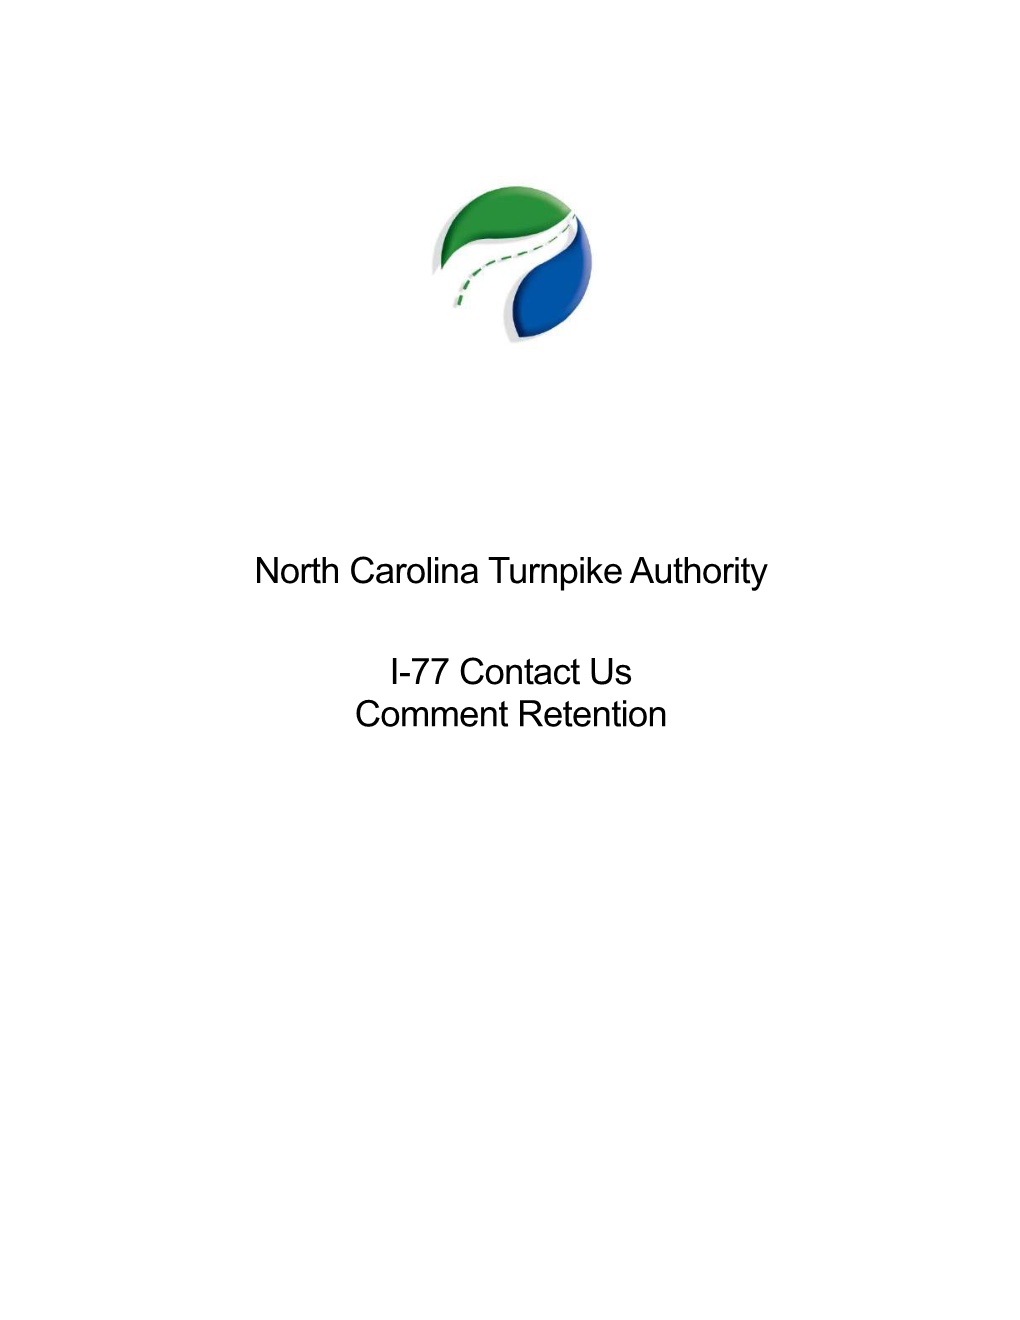 North Carolina Turnpike Authority I-77 Contact Us Comment Retention